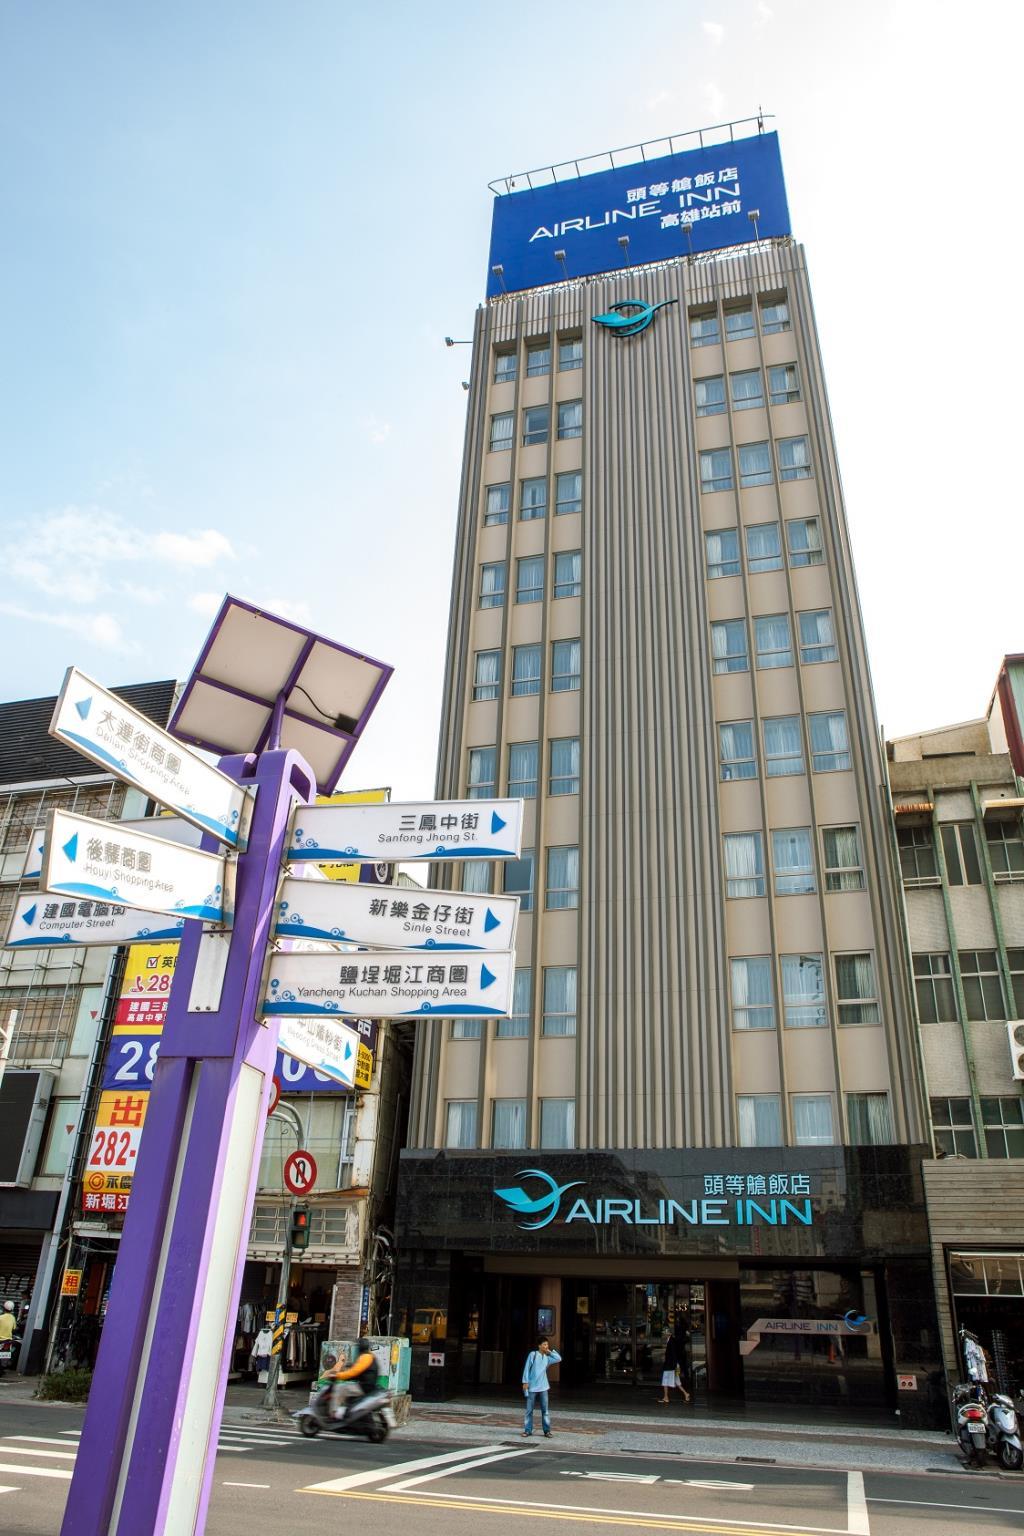 AIRLINE INN KAOHSIUNG STATION